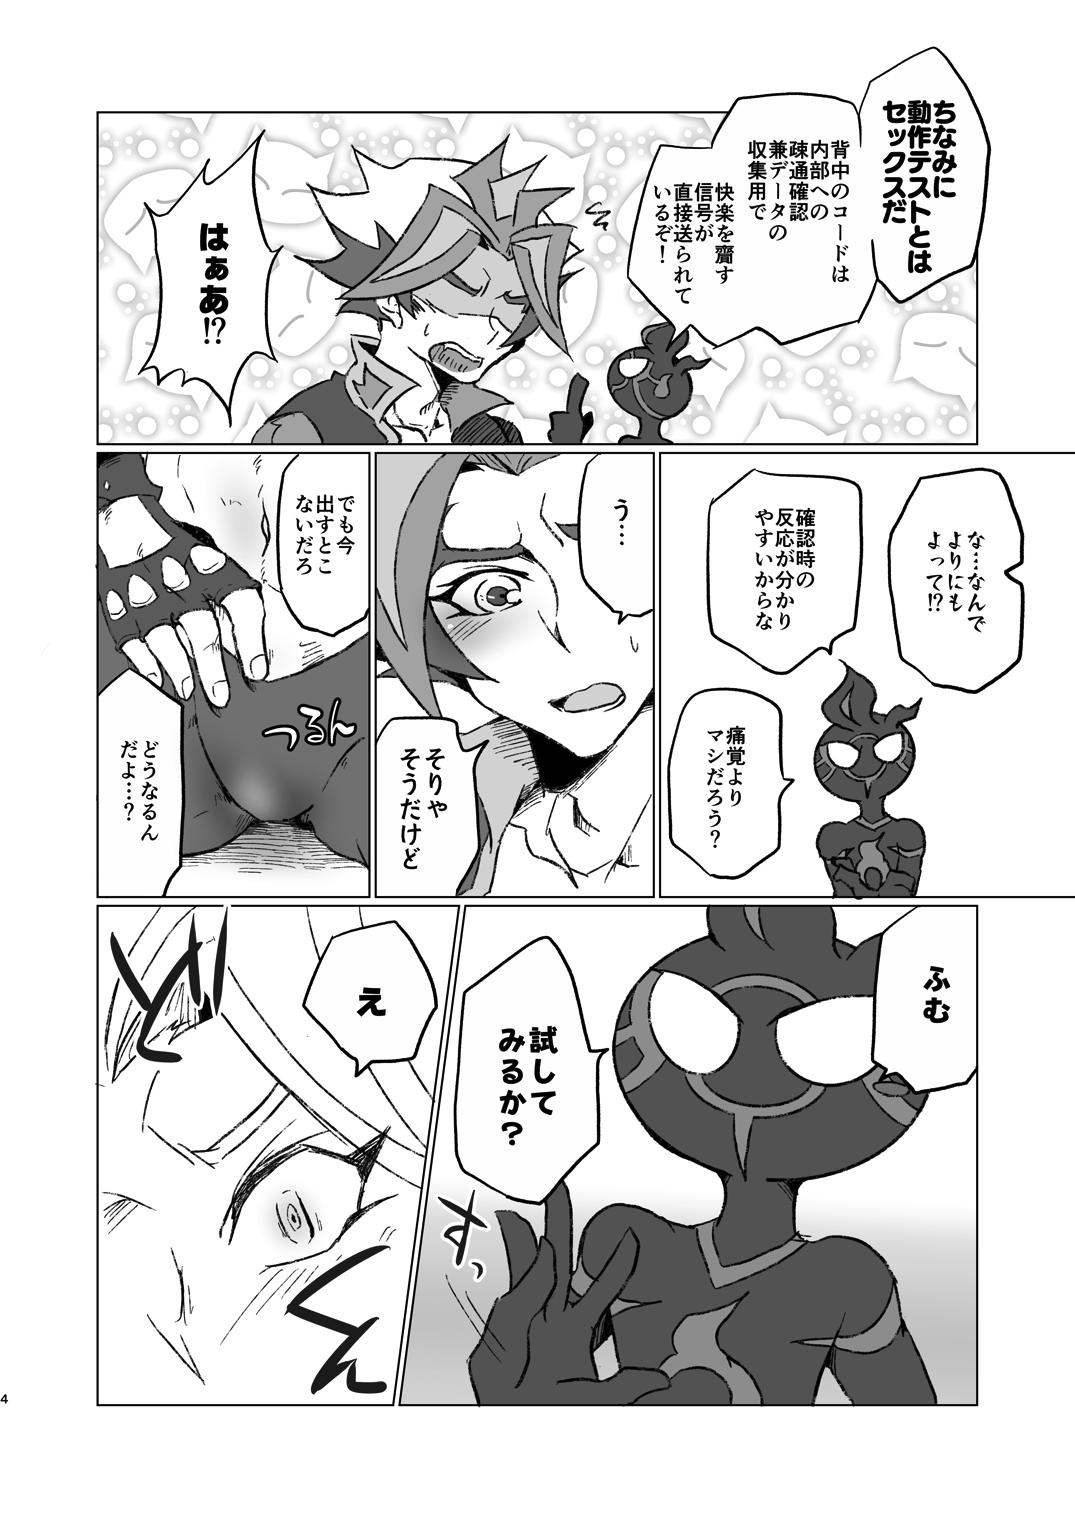 Nice Ass A little bit further - Yu-gi-oh vrains Speculum - Page 3